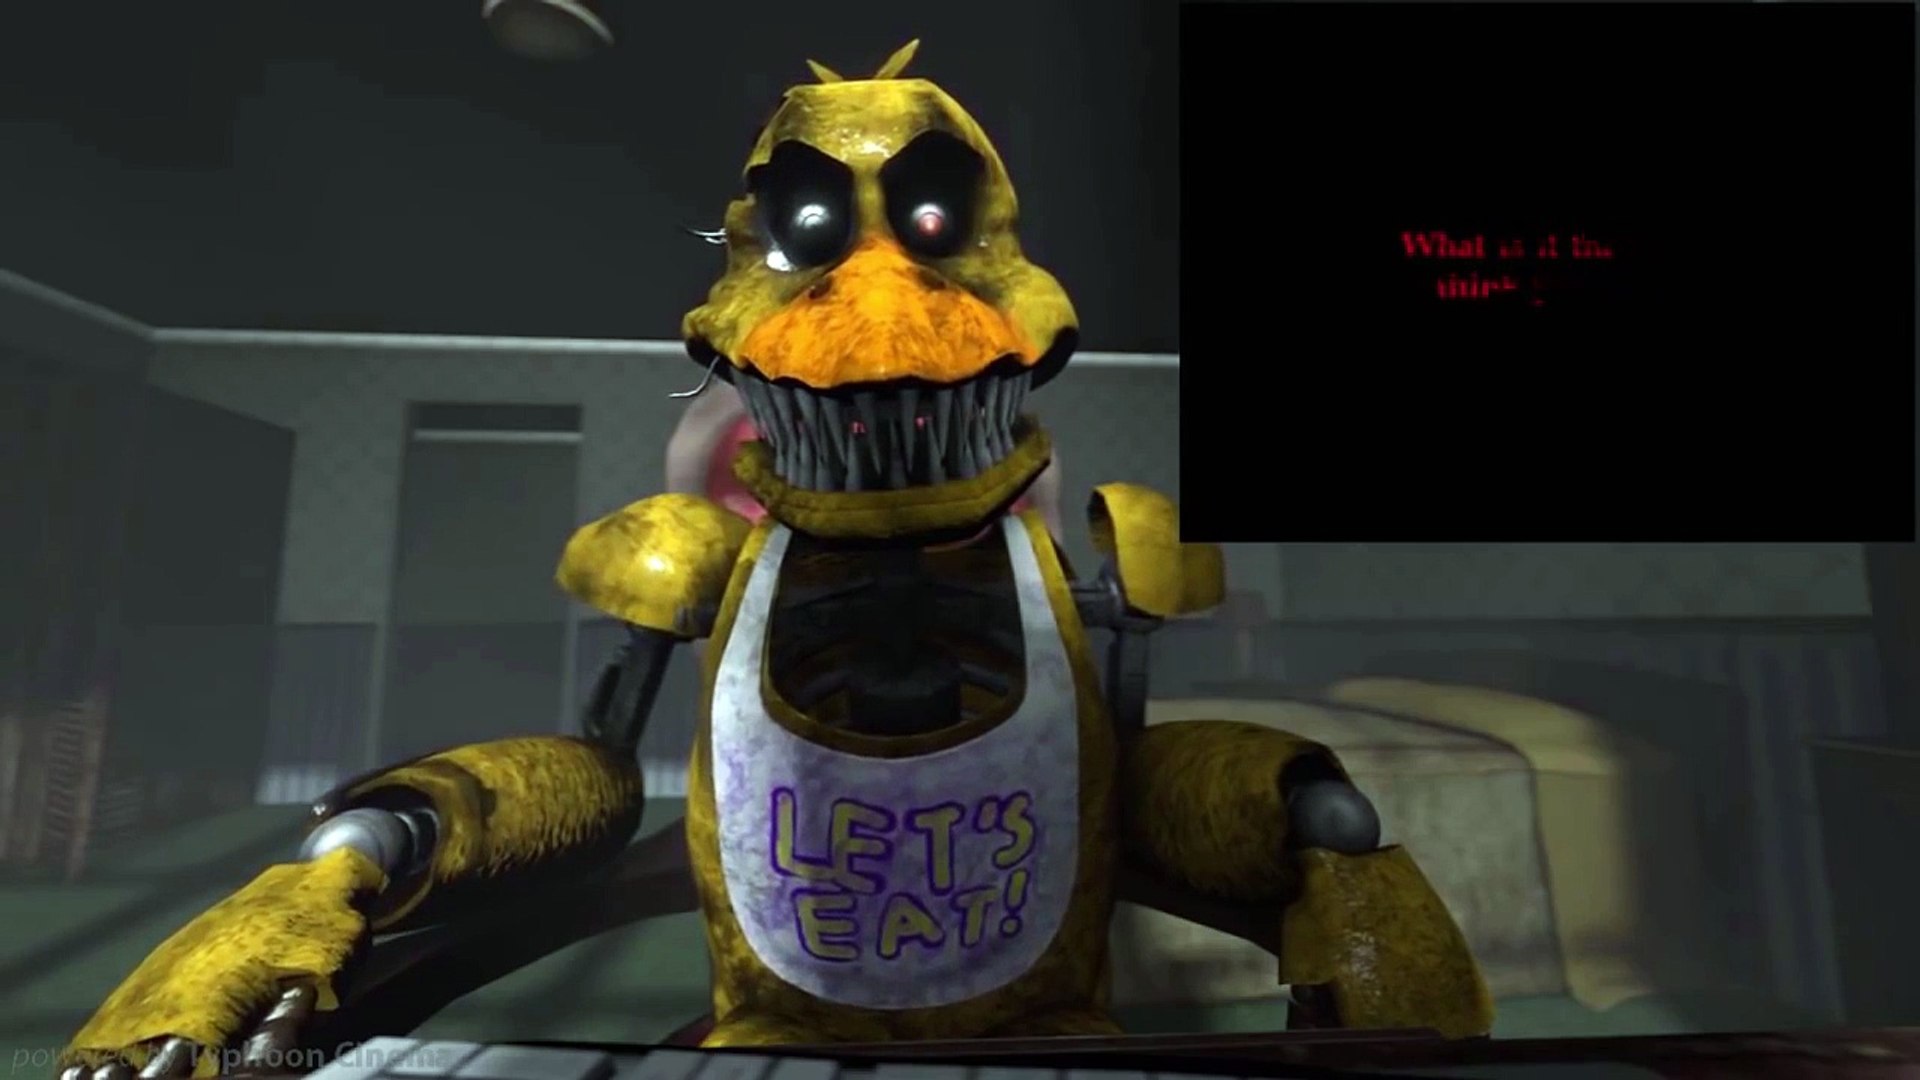 SFM FNAF 4] Nightmare Chica Jumpscare - Dailymotion Video